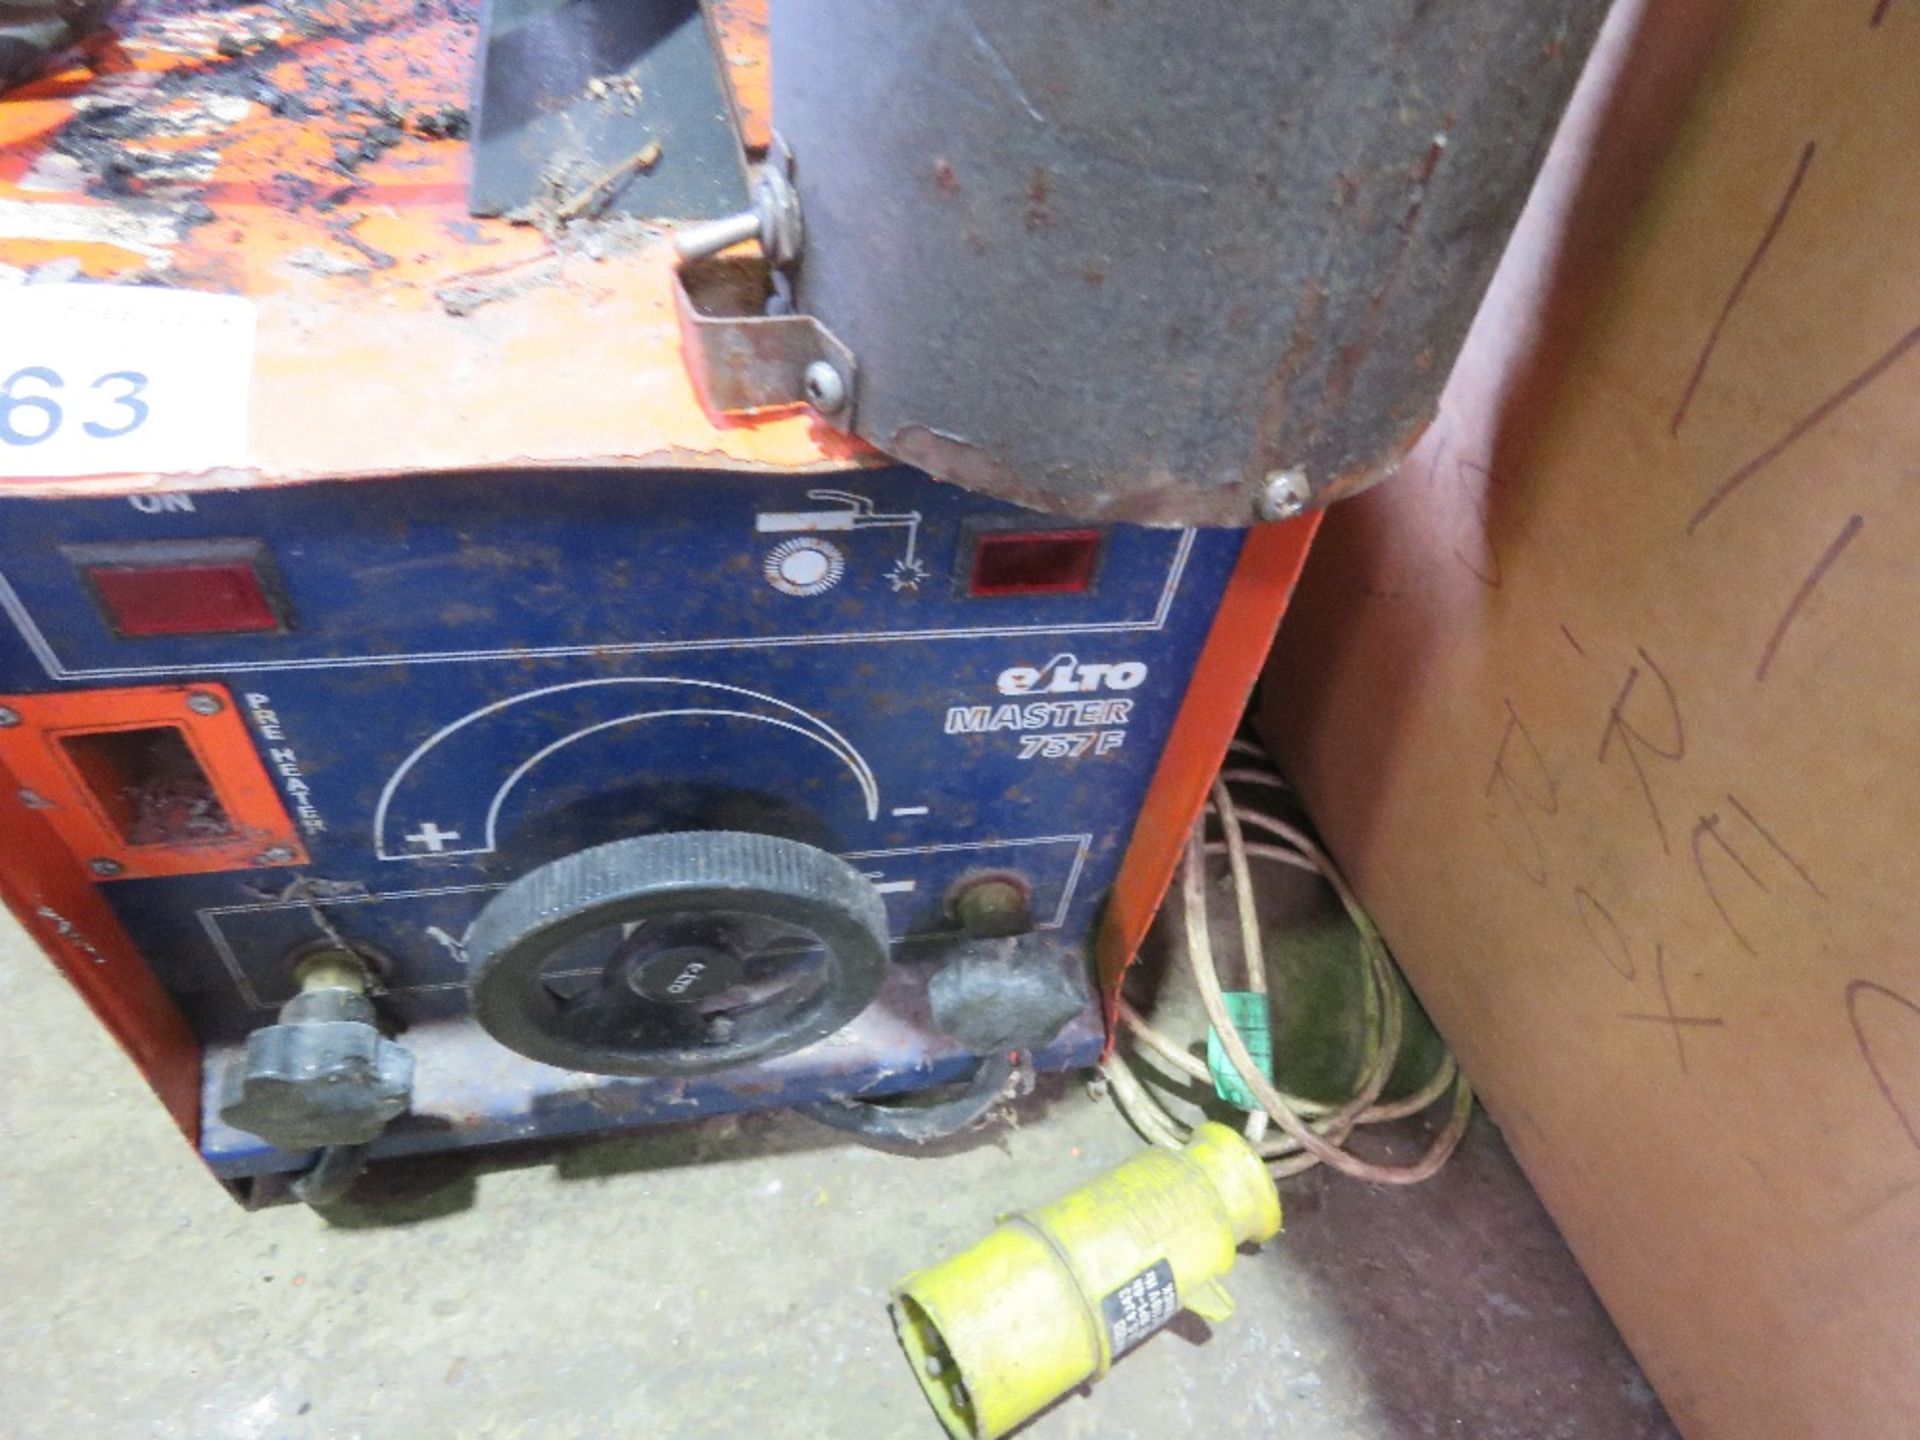 ELECTRIC ARC WELDER, 240VOLT PLUS A 110VOLT ROD DRIER. SOURCED FROM SITE CLOSURE/CLEARANCE. - Image 2 of 4